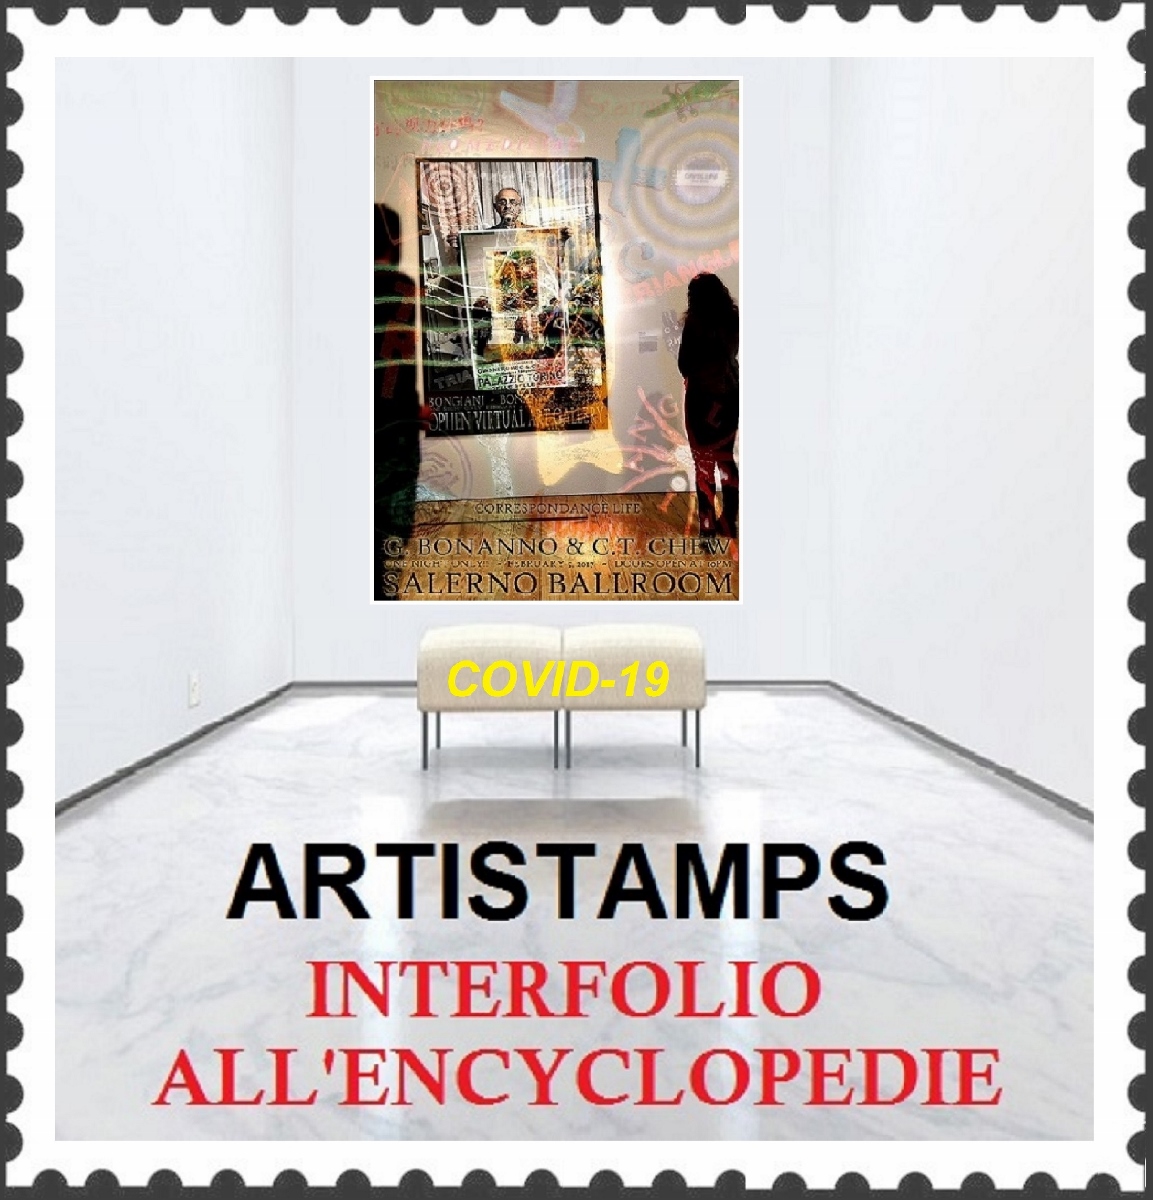 Artistamps / Interfolio all’Encyclopedie Covid-19